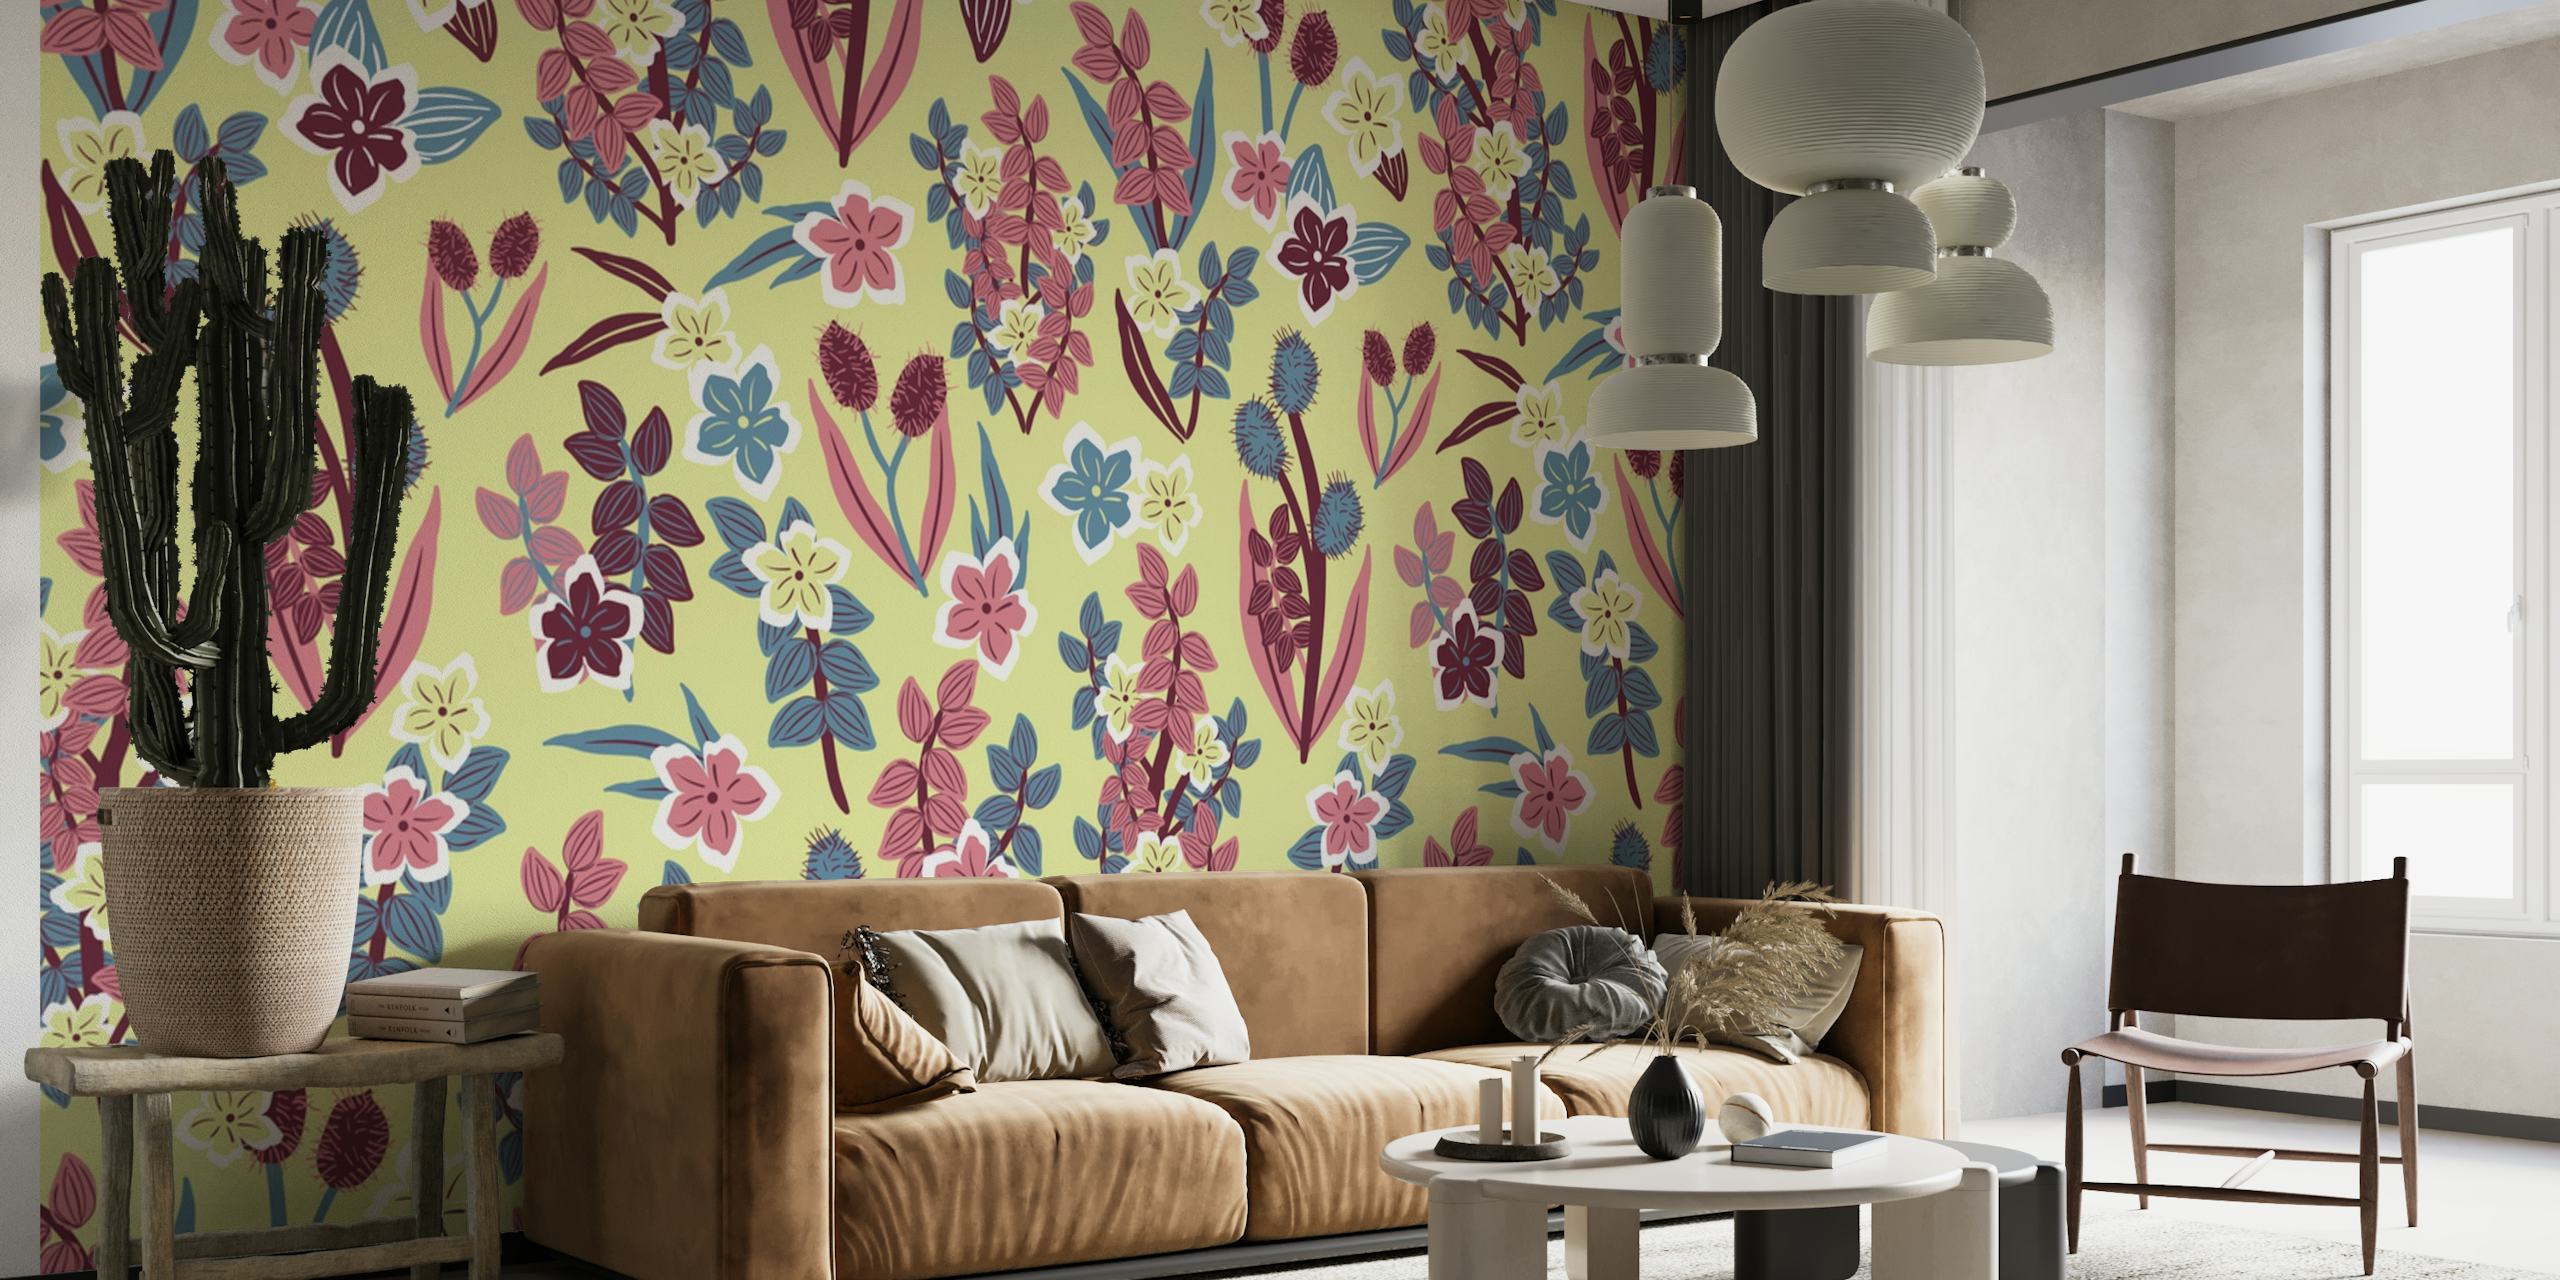 Floral wall mural with yellow, blue, and purple flowers creating a cascading effect on a neutral background